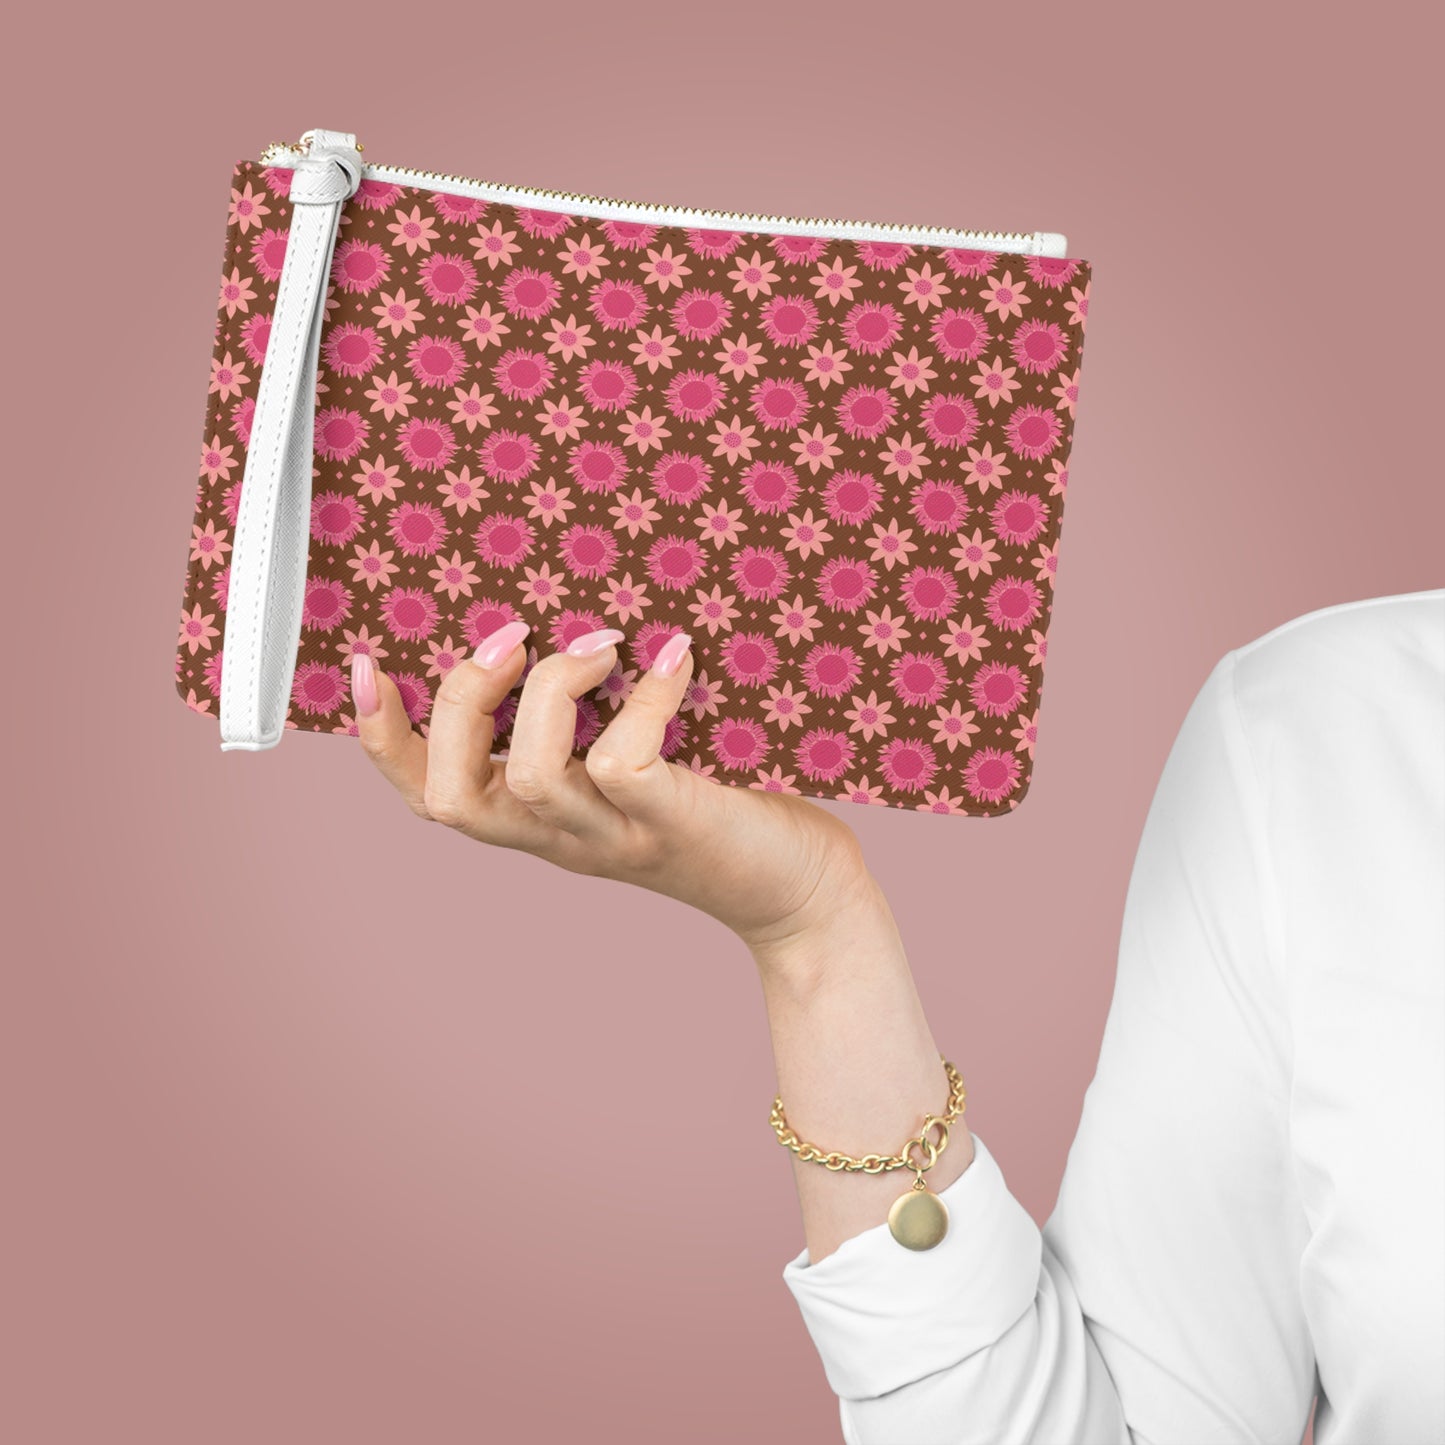 Retro Pink Daisies on Brown Background Clutch Bag